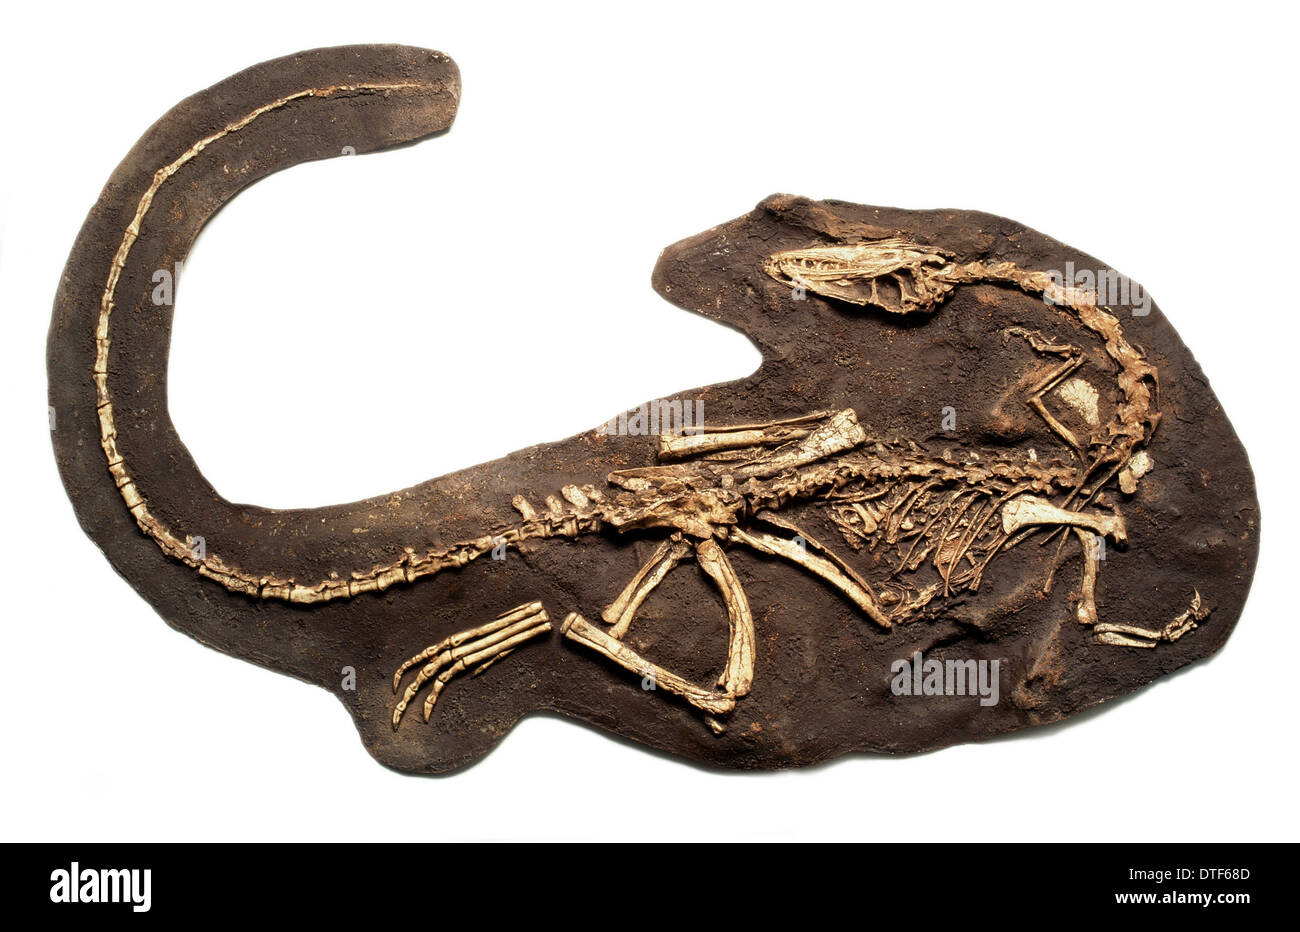 Coelophysis fossil Stock Photo